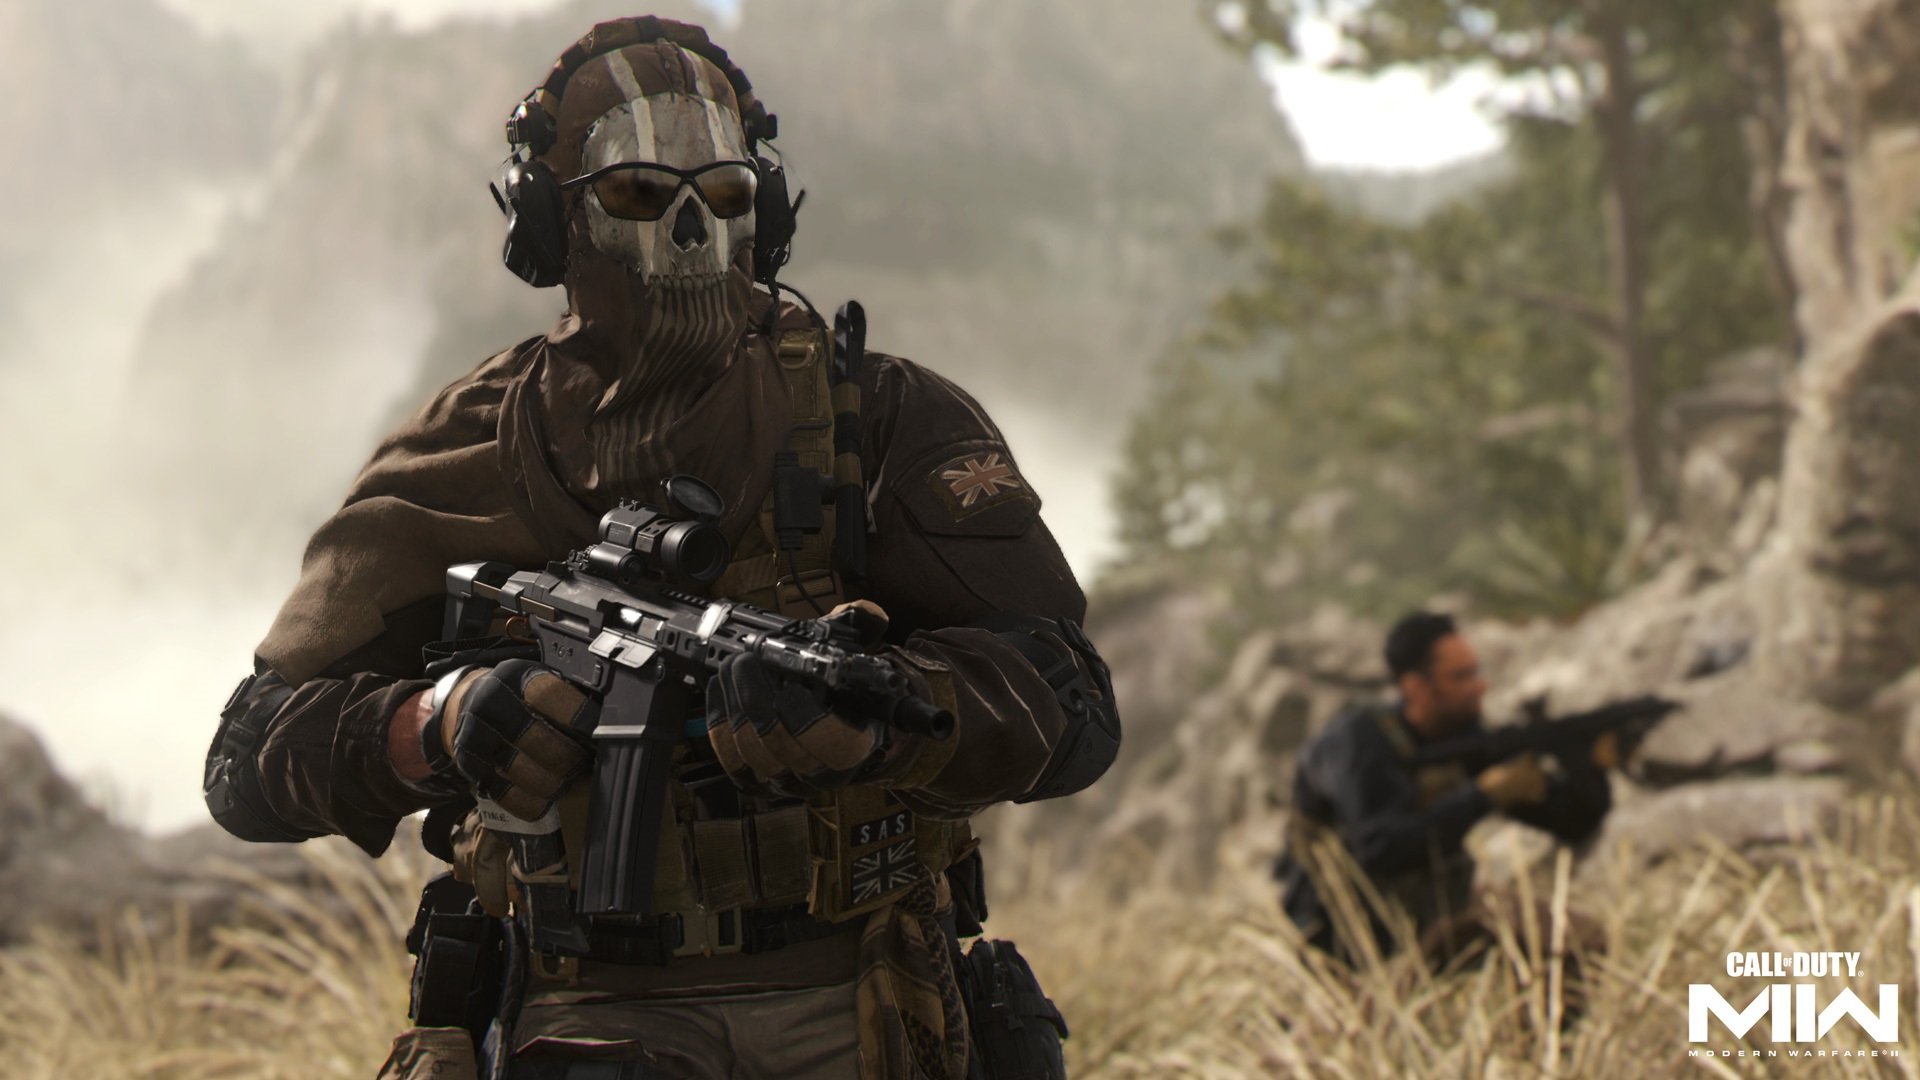 Call of Duty: Modern Warfare 3's New Gameplay Trailer is All About Stealth